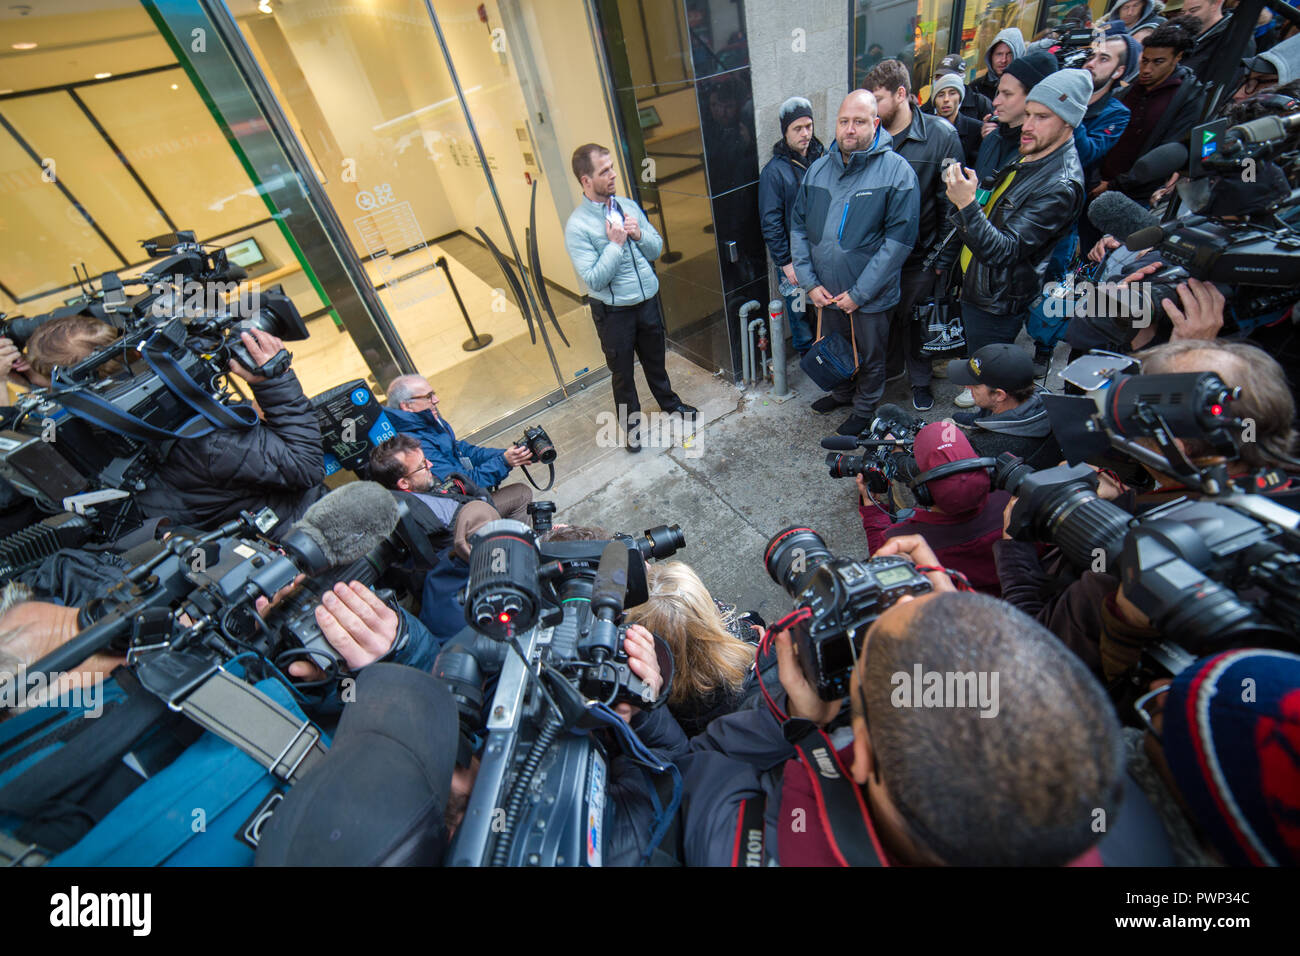 Montreal, Canada. 17th Oct, 2018. Members of the media are waiting for the doors to open at the SQDC (Société québécoise du cannabis) store. Hugo Senecal, a 39-year-old Montrealer who was at the head of that line on Sainte Catherine street, waited since 3:30 am to be the first to buy legal marijuana at that store. Cannabis became legal in Canada on October 17. In Quebec, it will be commercialized by the SQDC. Credit: Cristian Mijea/Alamy Live News Stock Photo